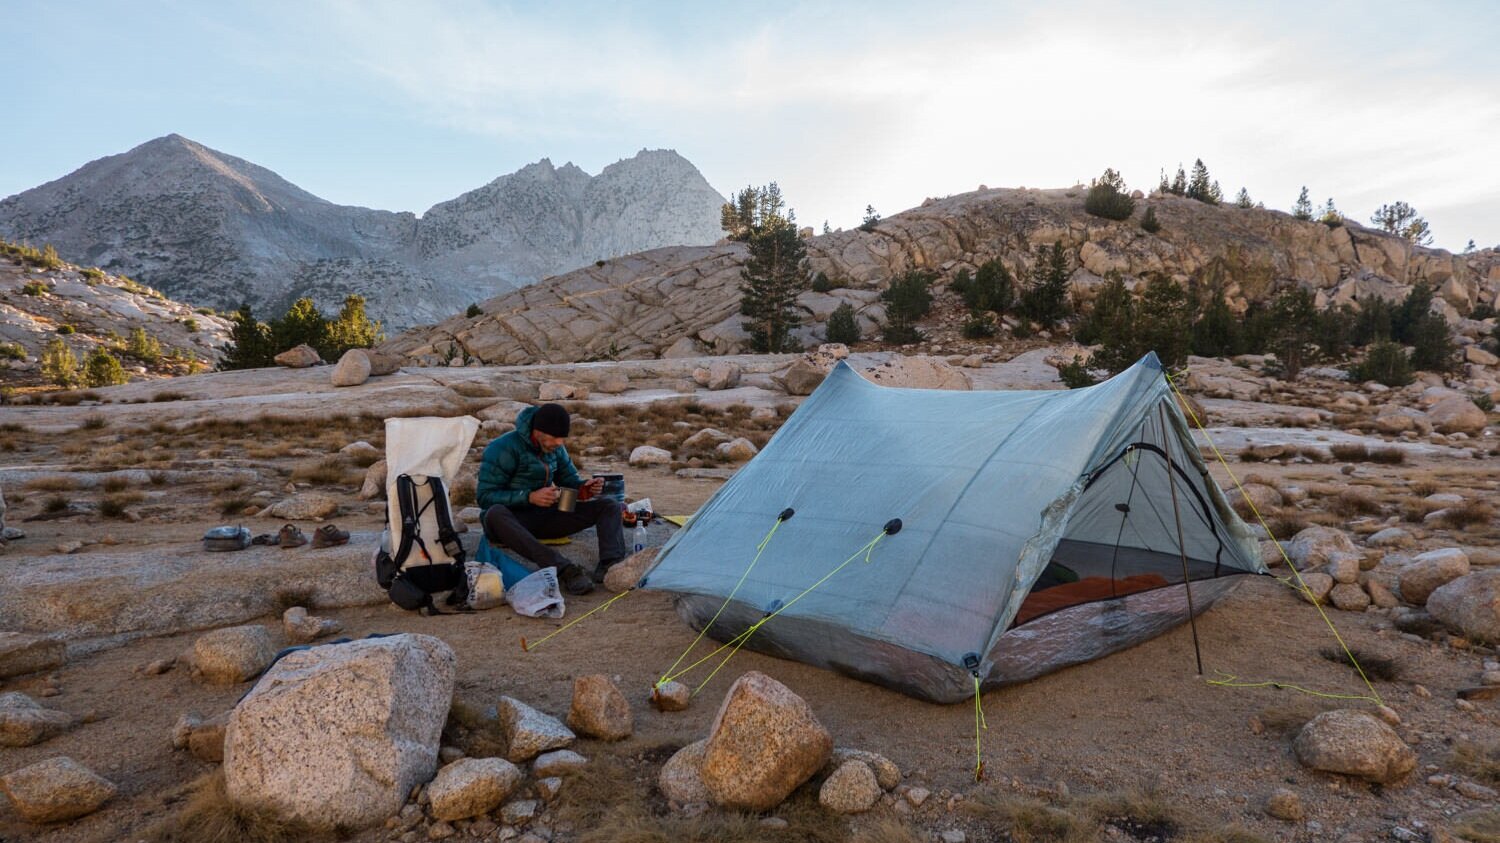 hiking the John Muir Trail with the Hyperlite Mountain Gear Southwest 3400 backpack and the Zpacks Triplex Tent.